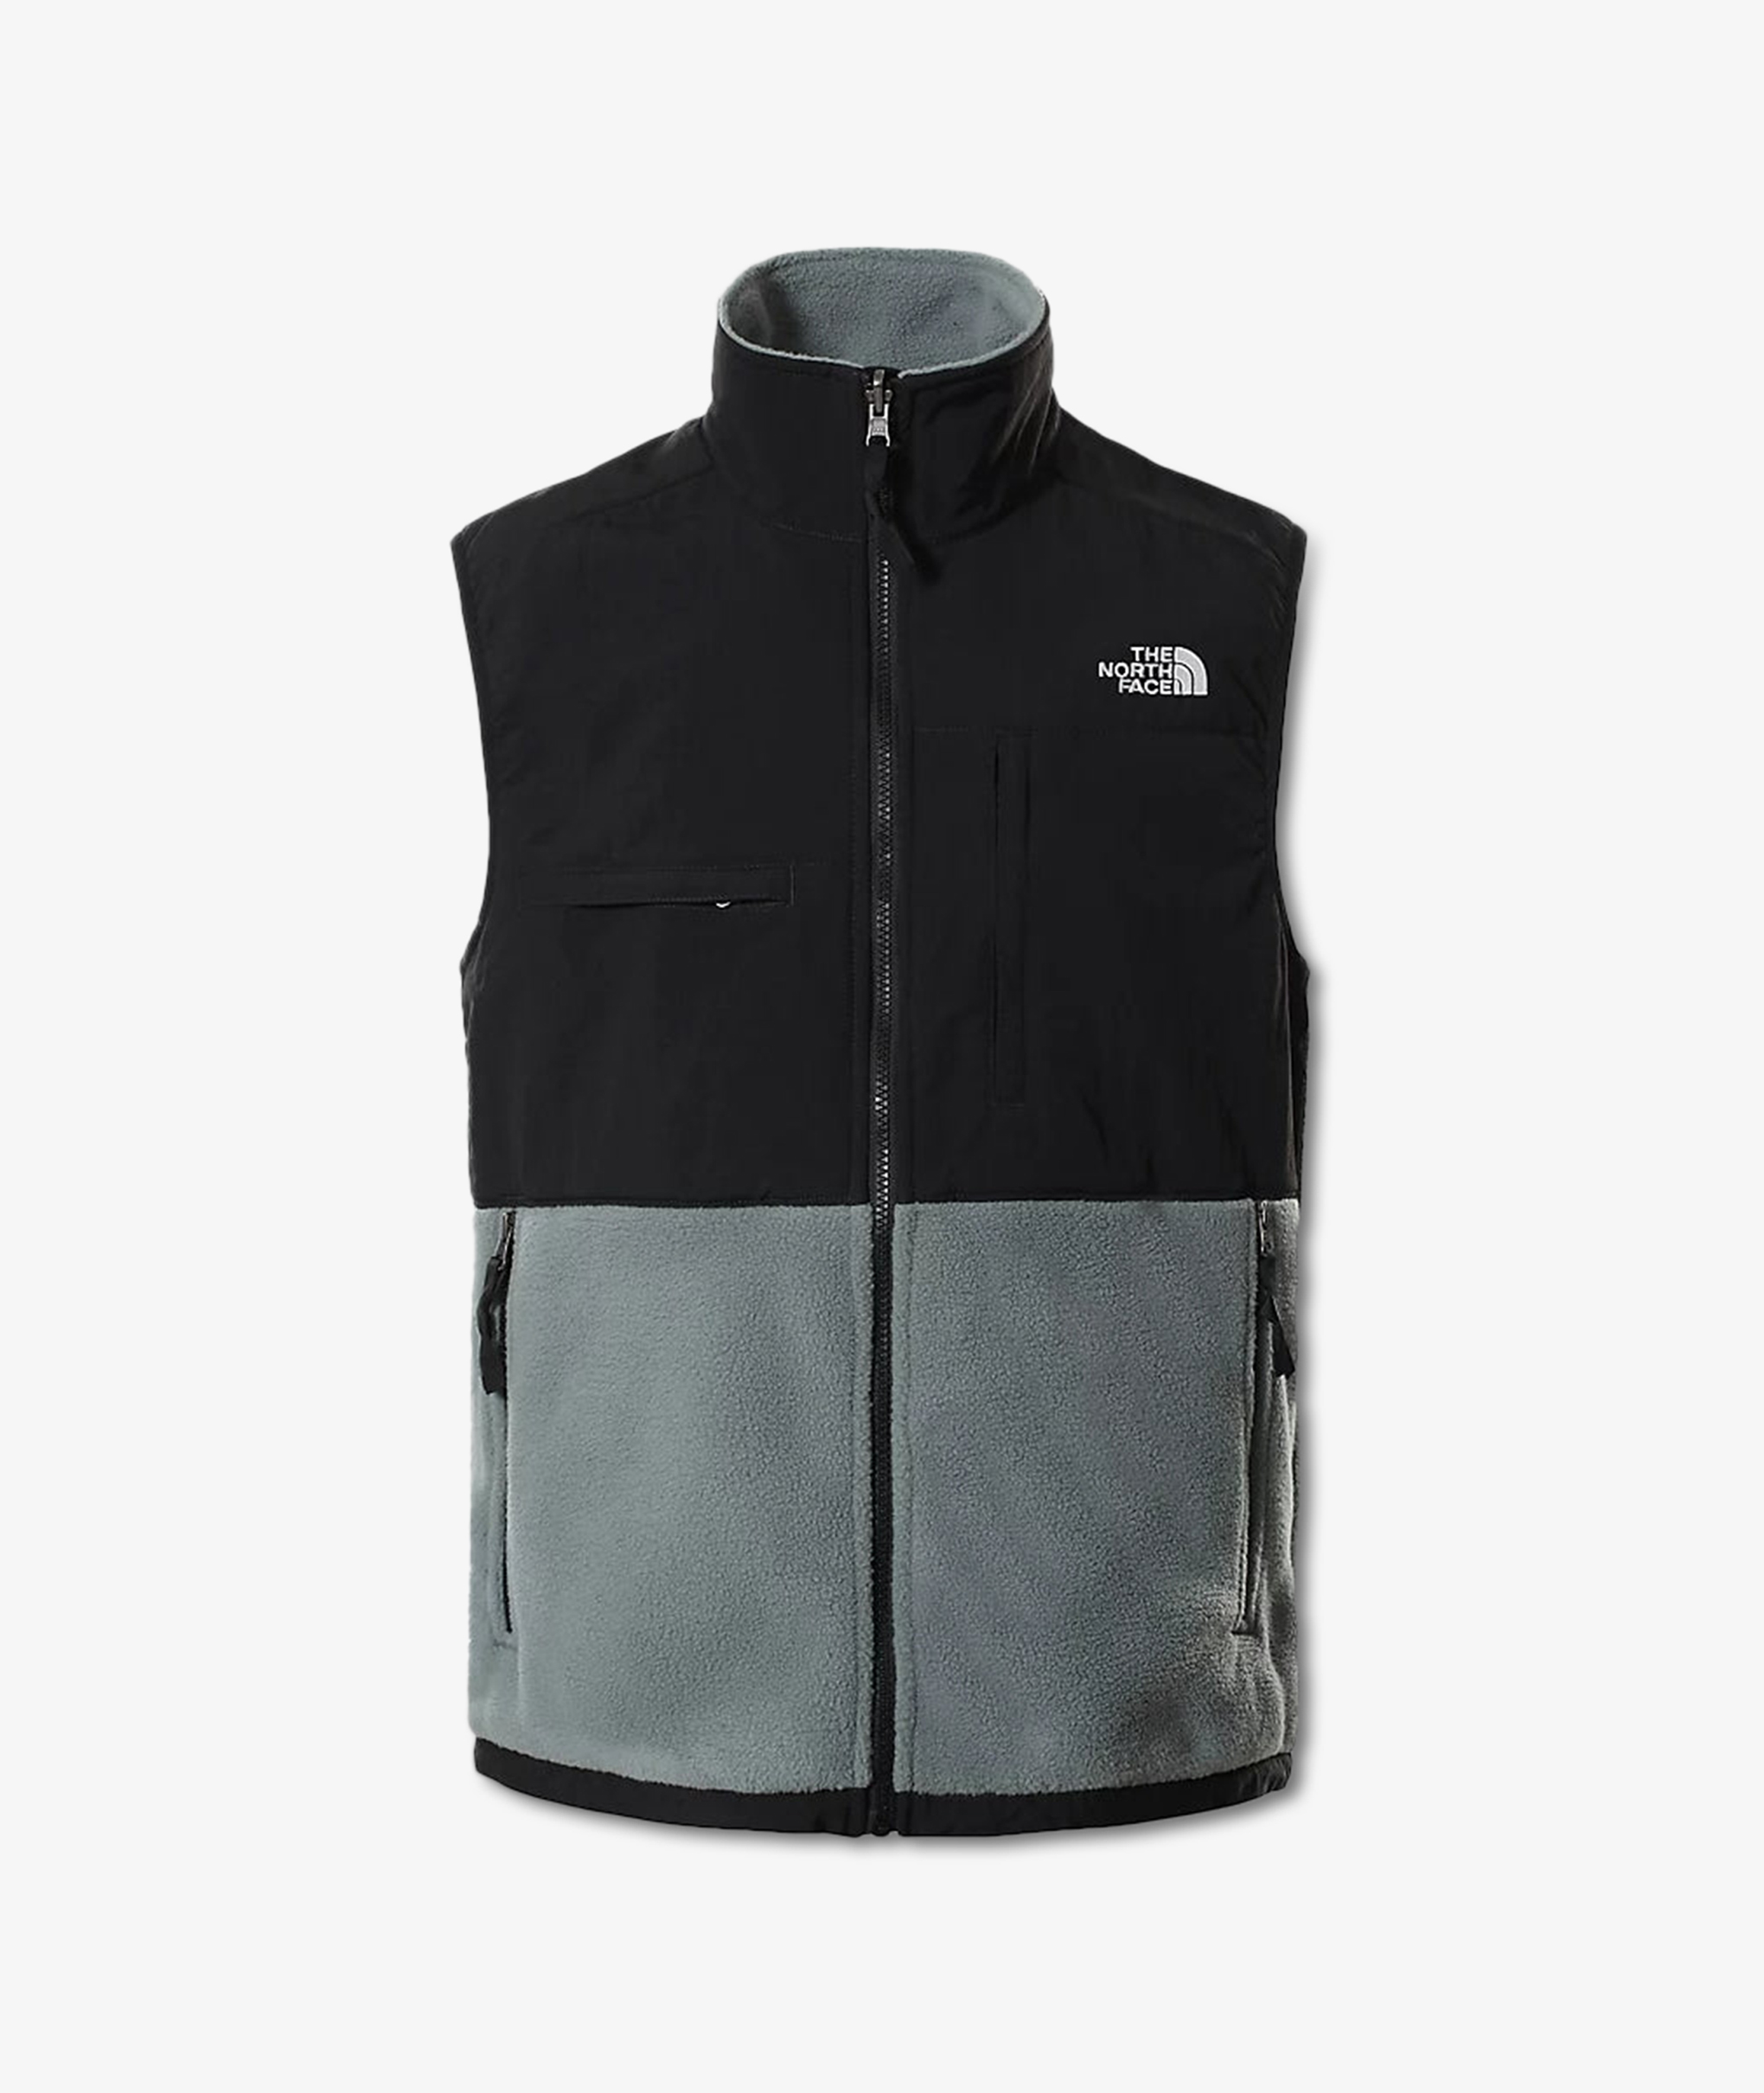 Norse Store | Shipping Worldwide - The North Face M Denali Vest